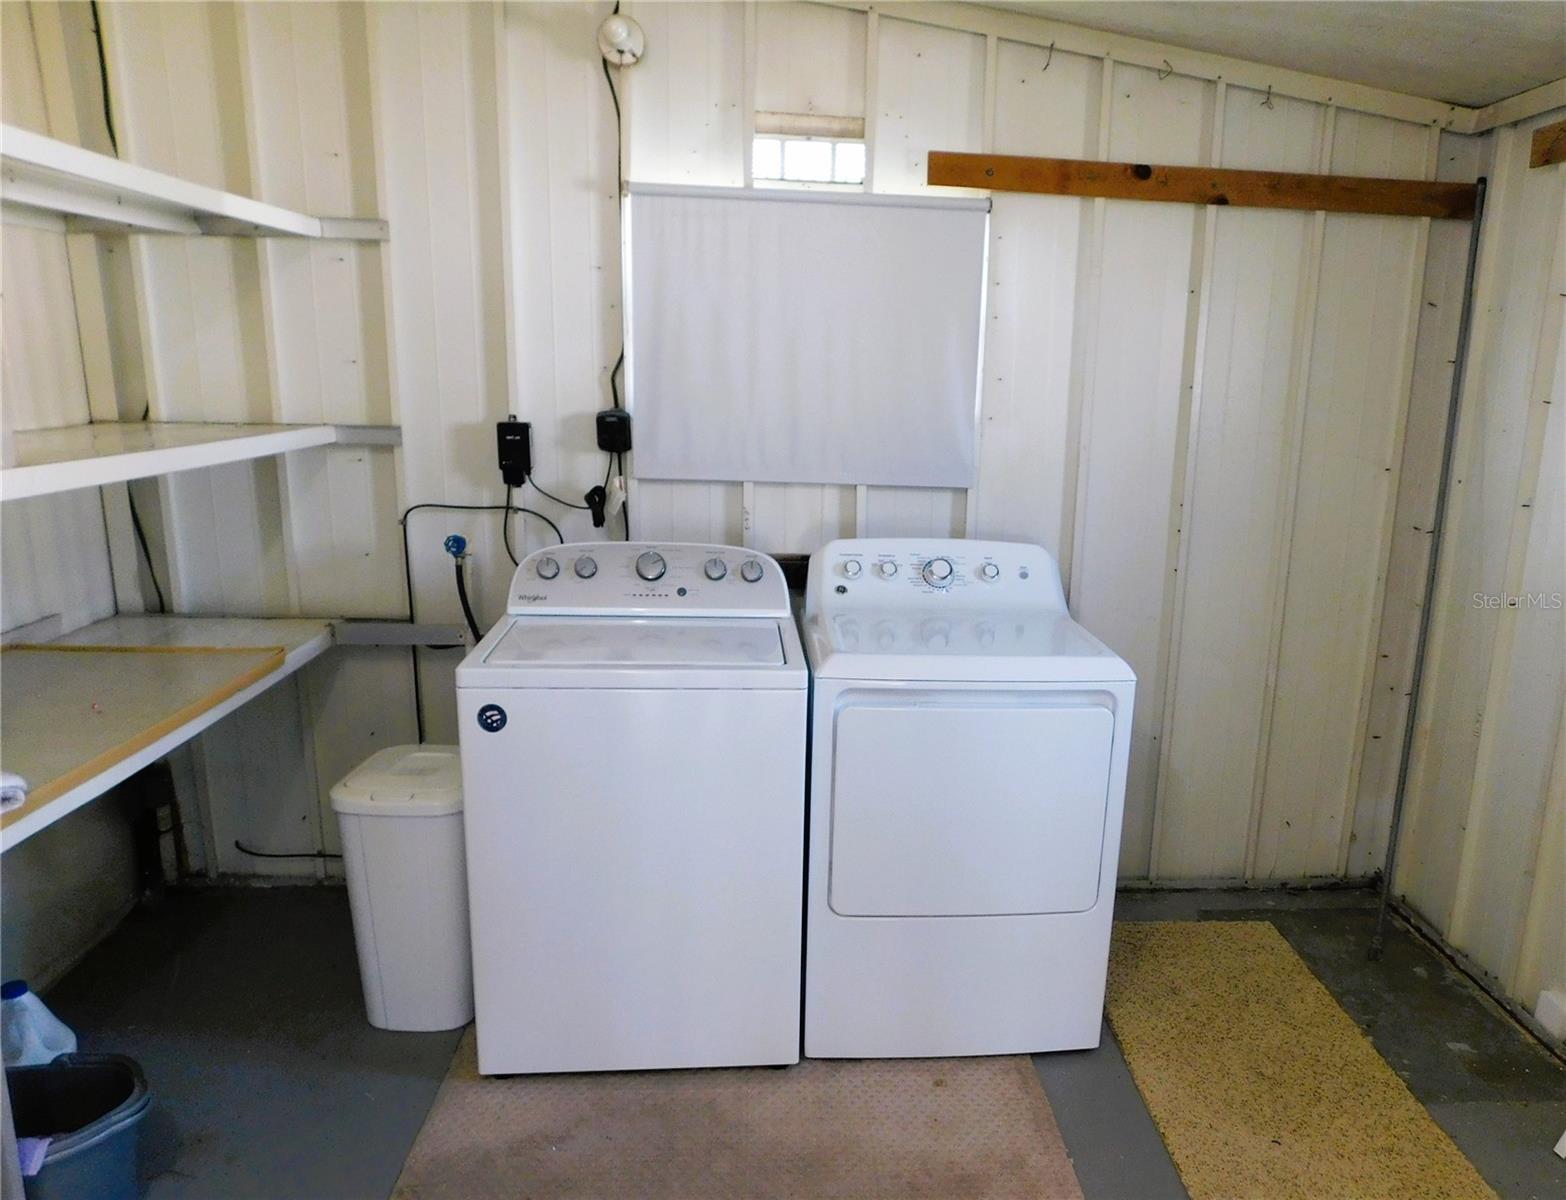 Laundry is off screen room.